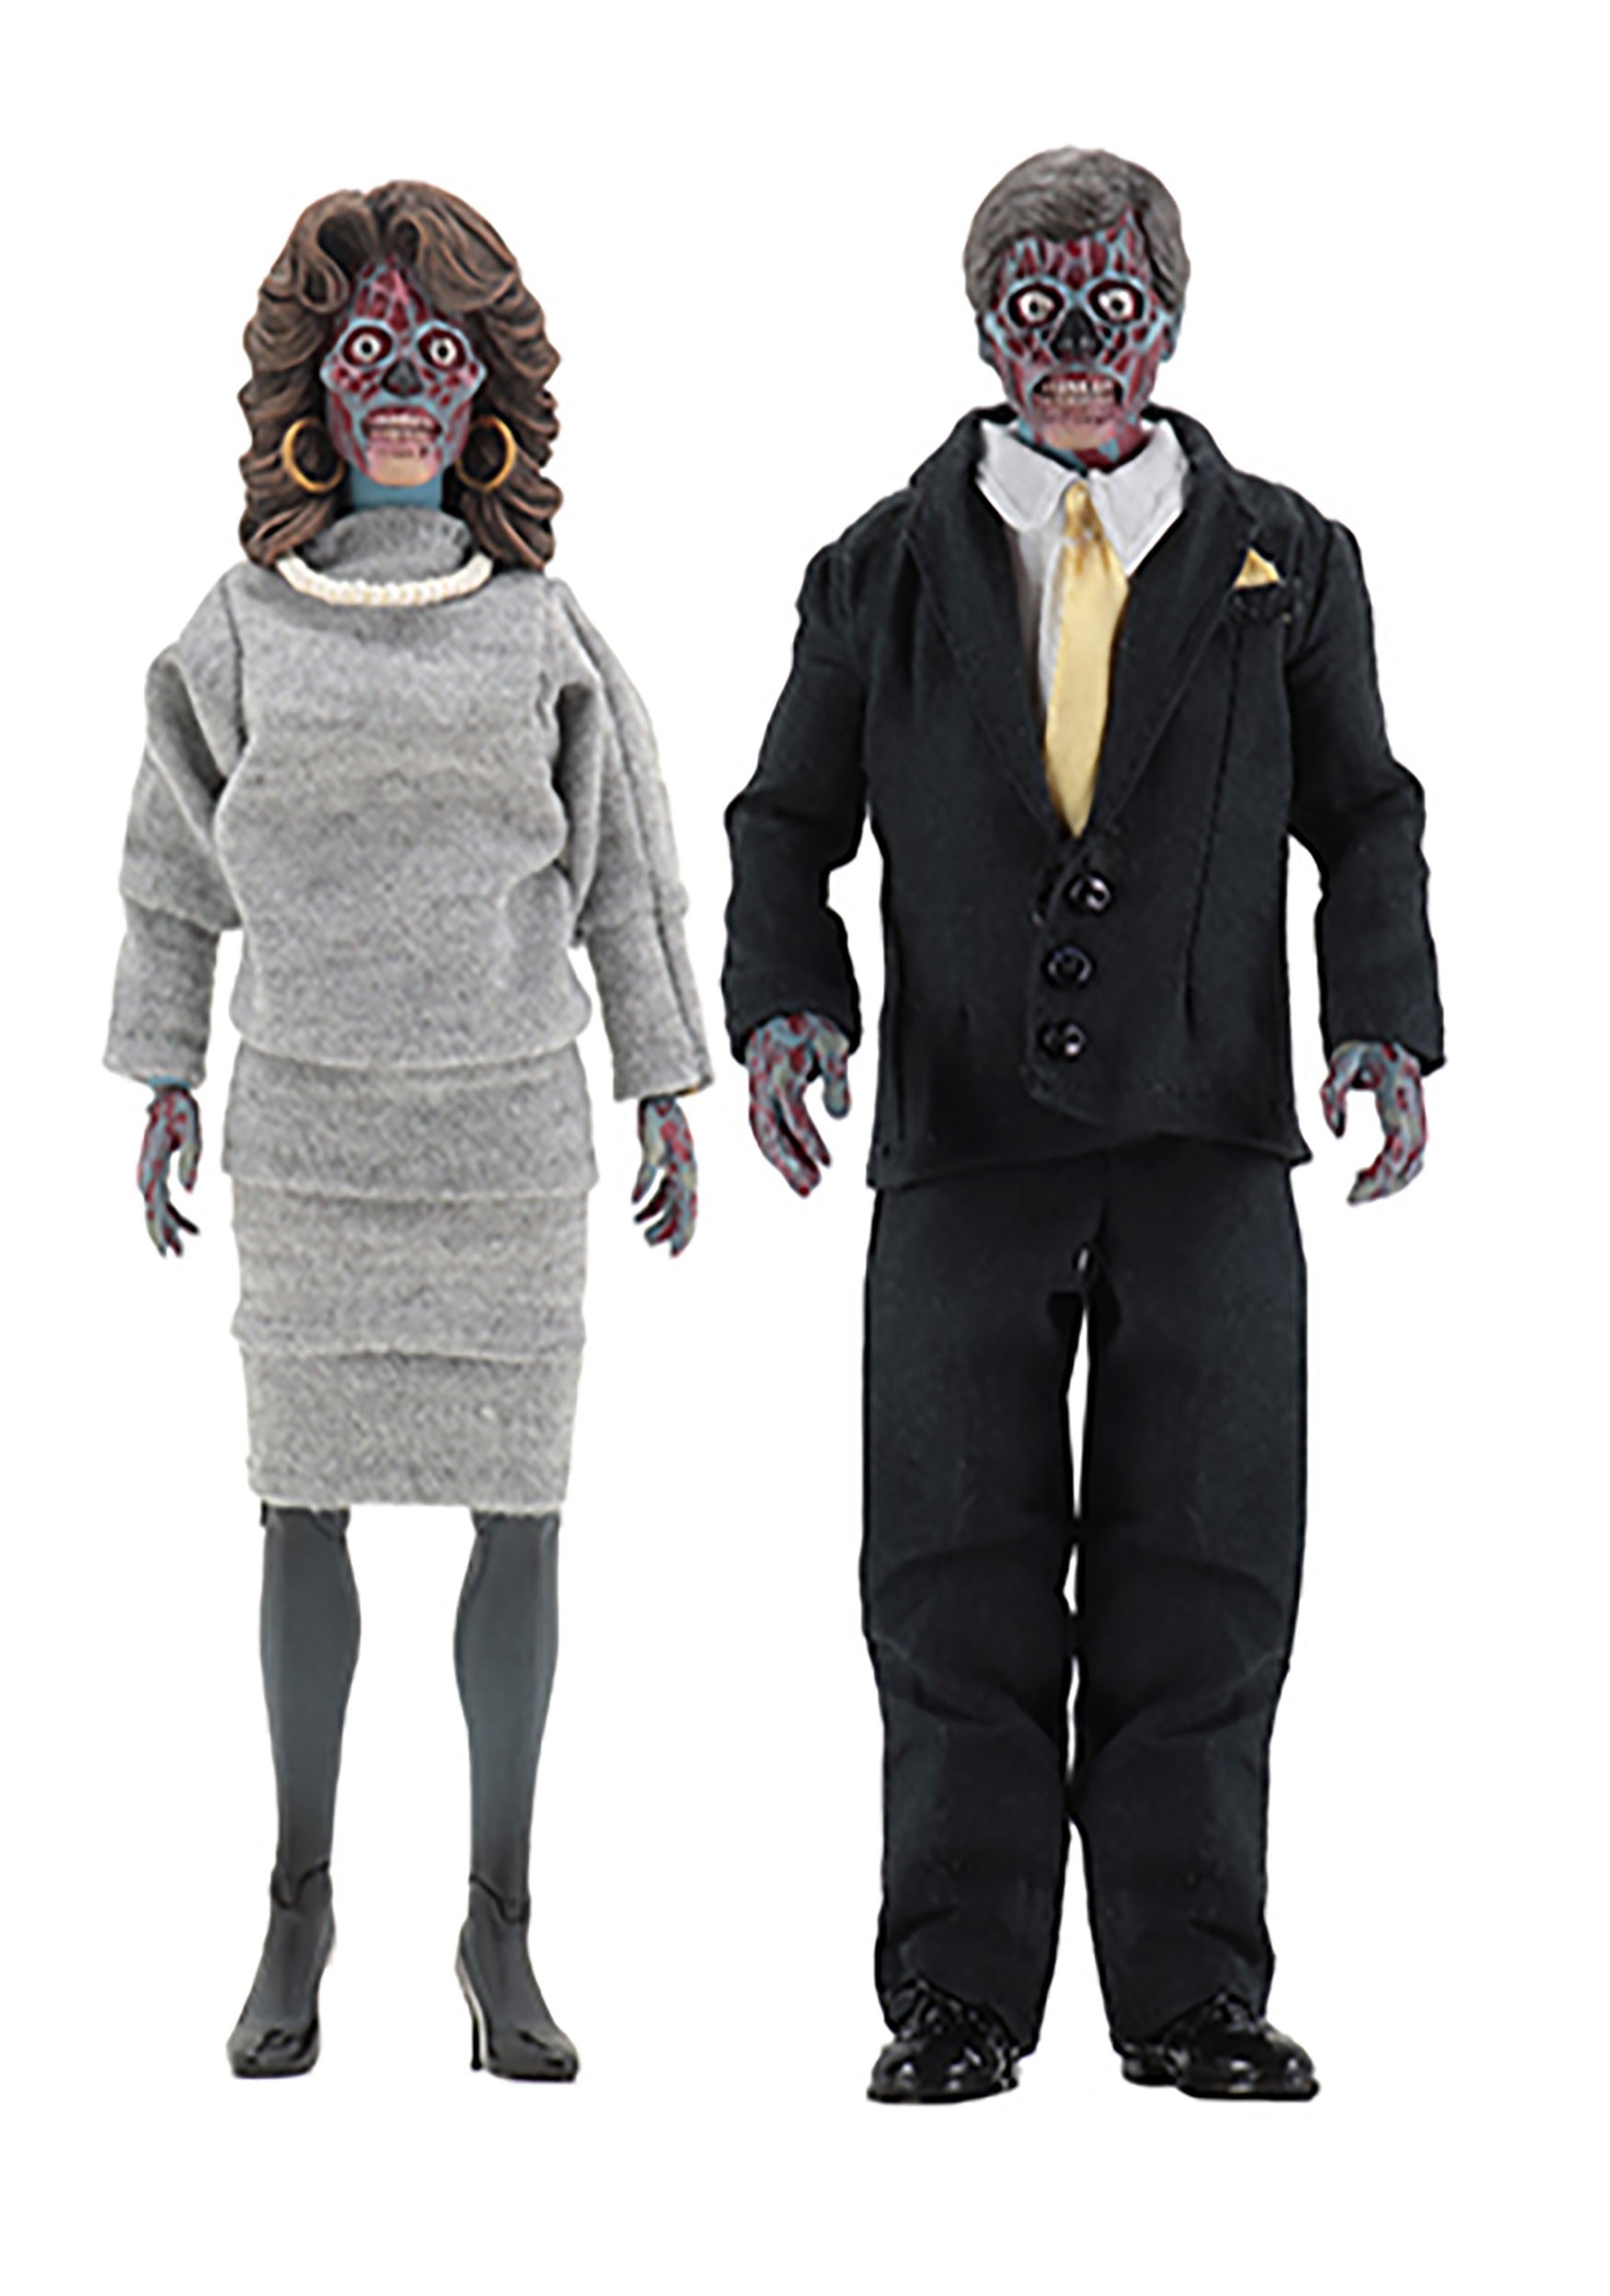 8 Inch Clothed Action Figure They Live 2-Pack | Action Figures